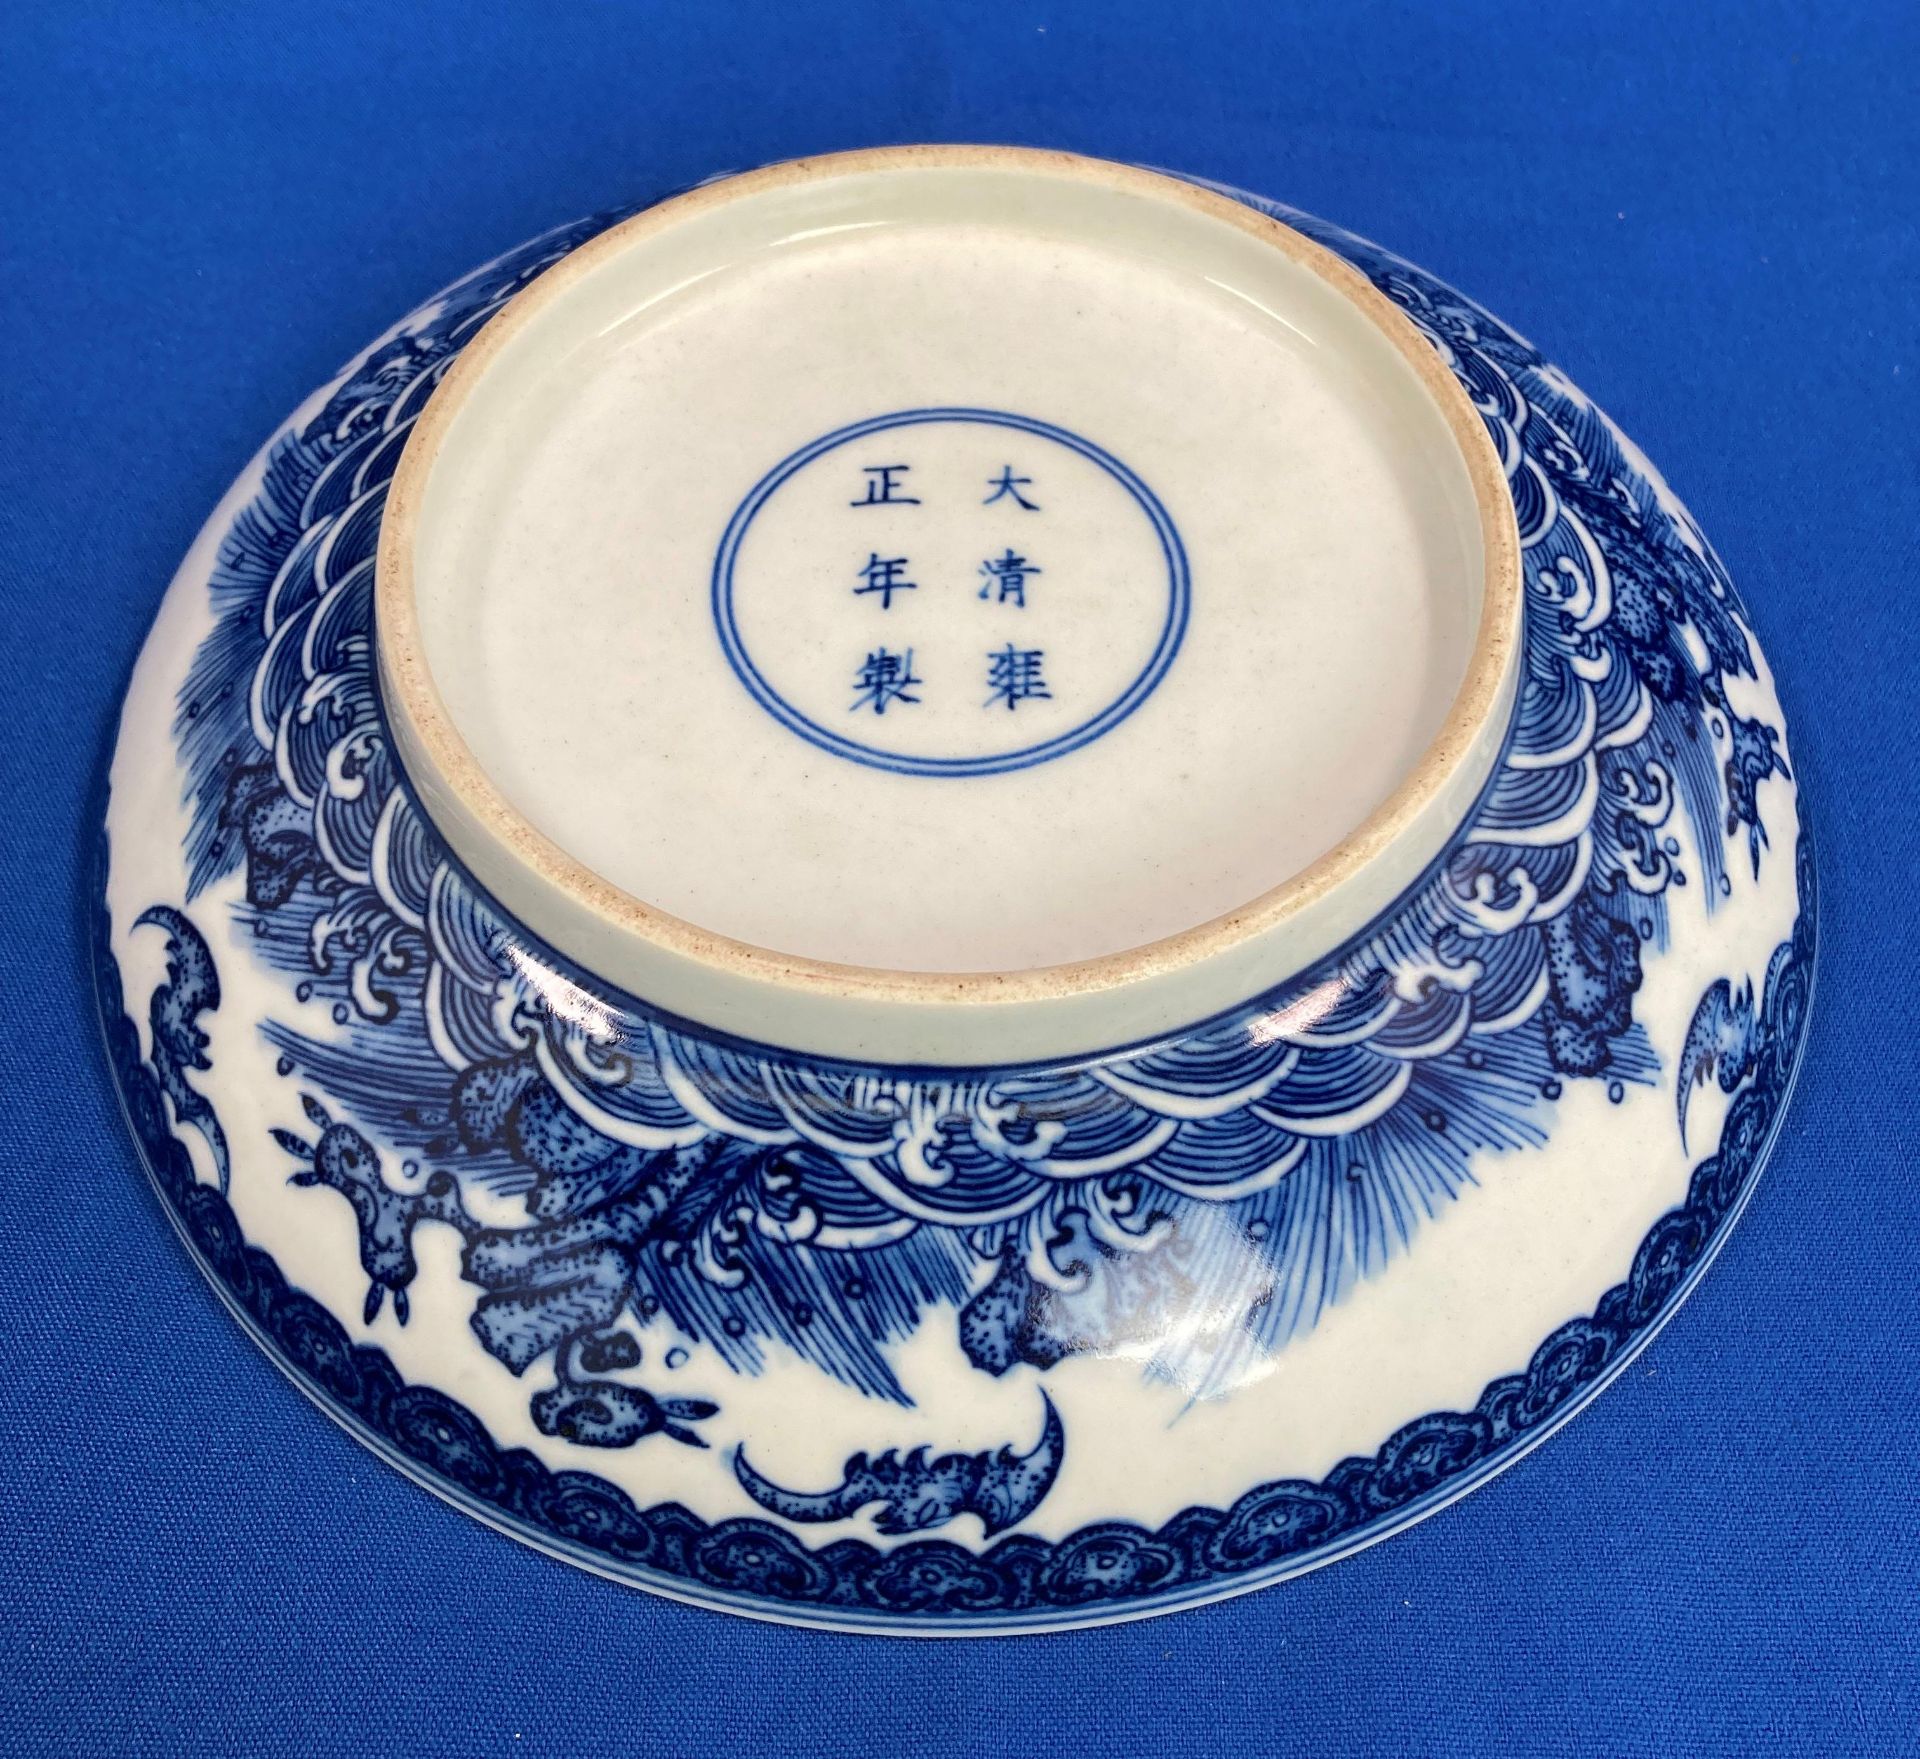 An antique 'Yongzheng' reign blue and white Oriental bowl with fig tree design and six symbol mark - Image 8 of 11